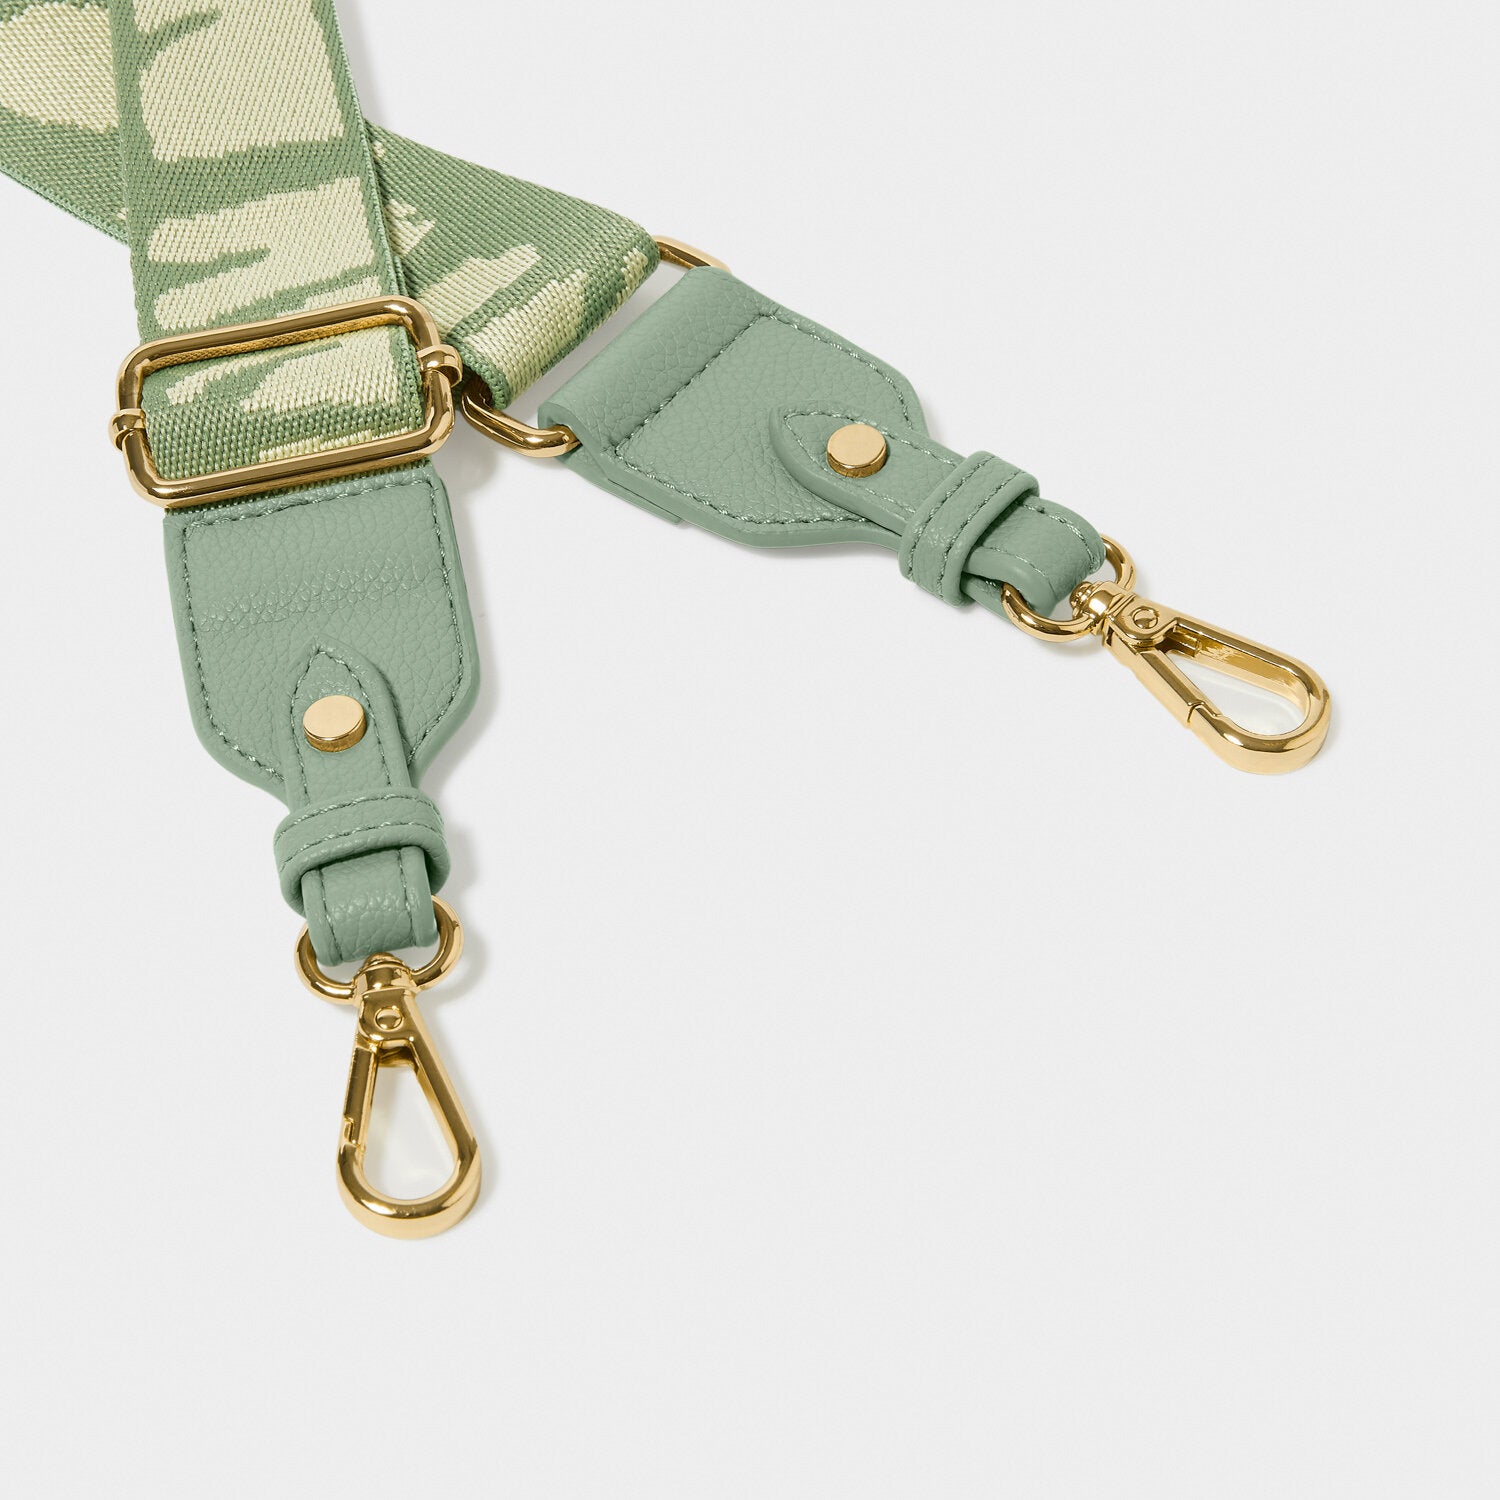 Abstract Canvas Strap - Sea Foam Green & Ivory